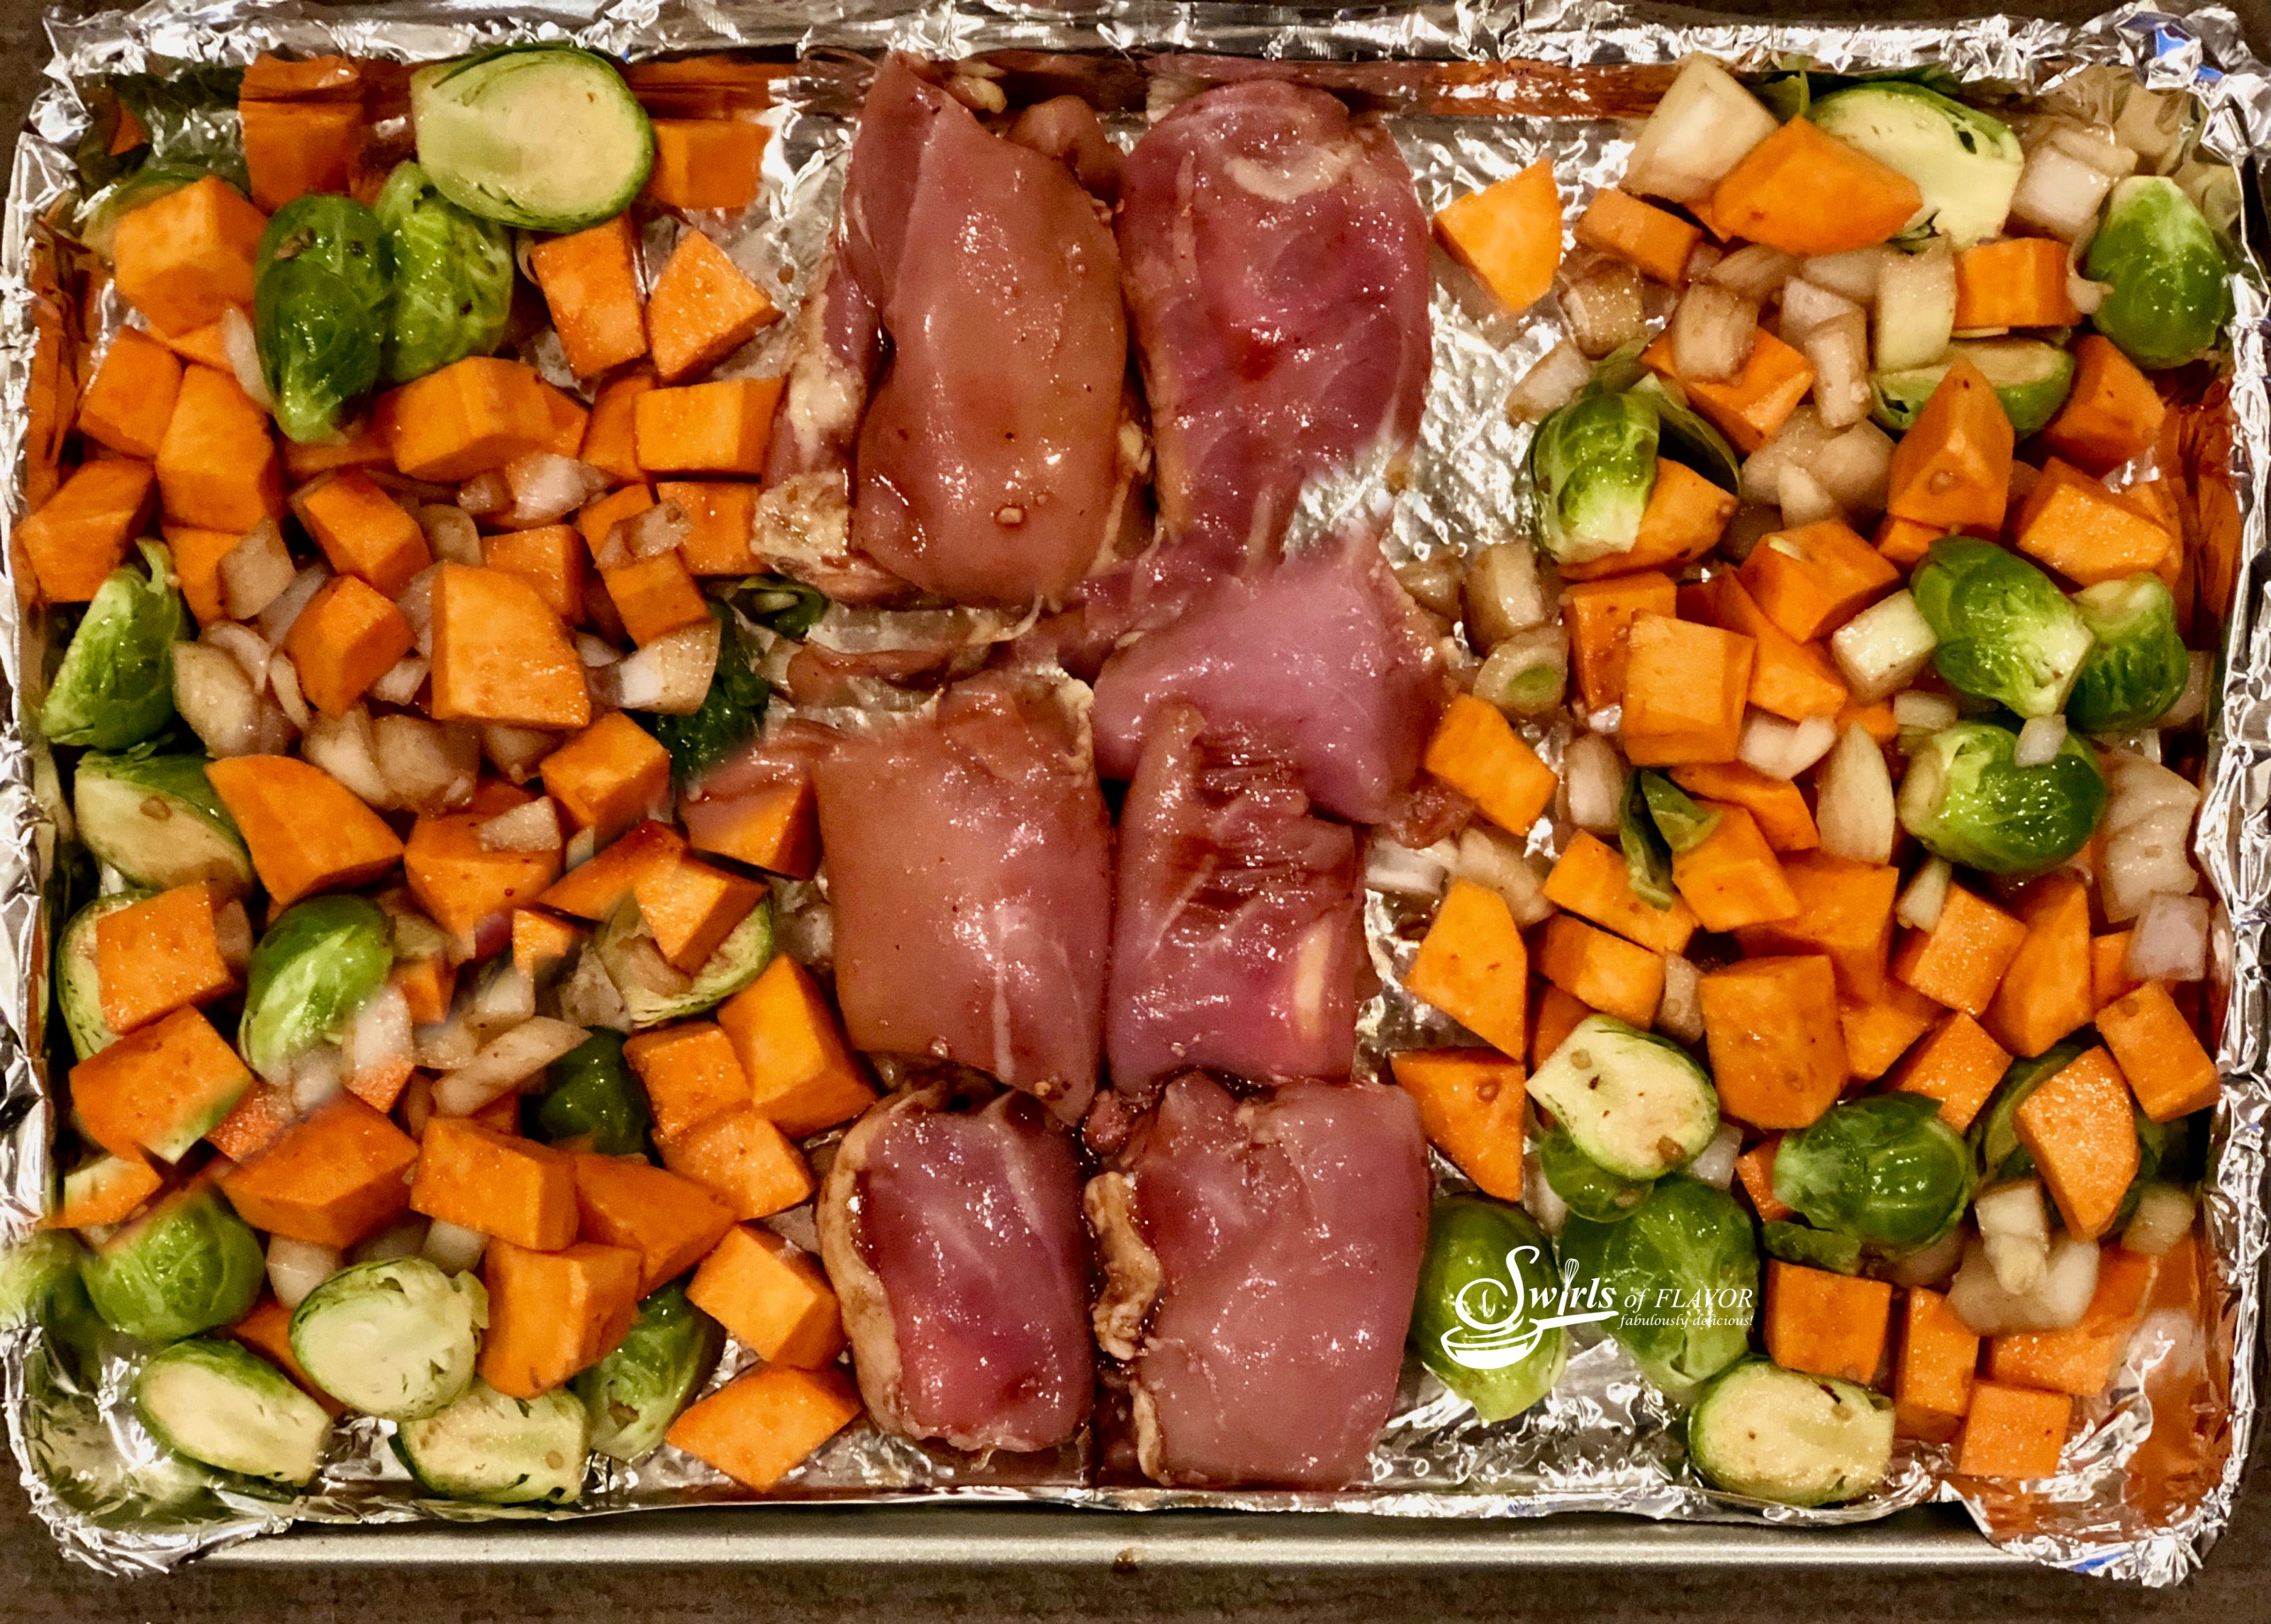 Sheet Pan Balsamic Chicken Thighs, Brussel Sprouts & Sweet Potatoes roast together in a balsamic honey sauce with just a hint of heat. sheet pan | dinner | easy | recipe | chicken thighs | honey | balsamic vinegar